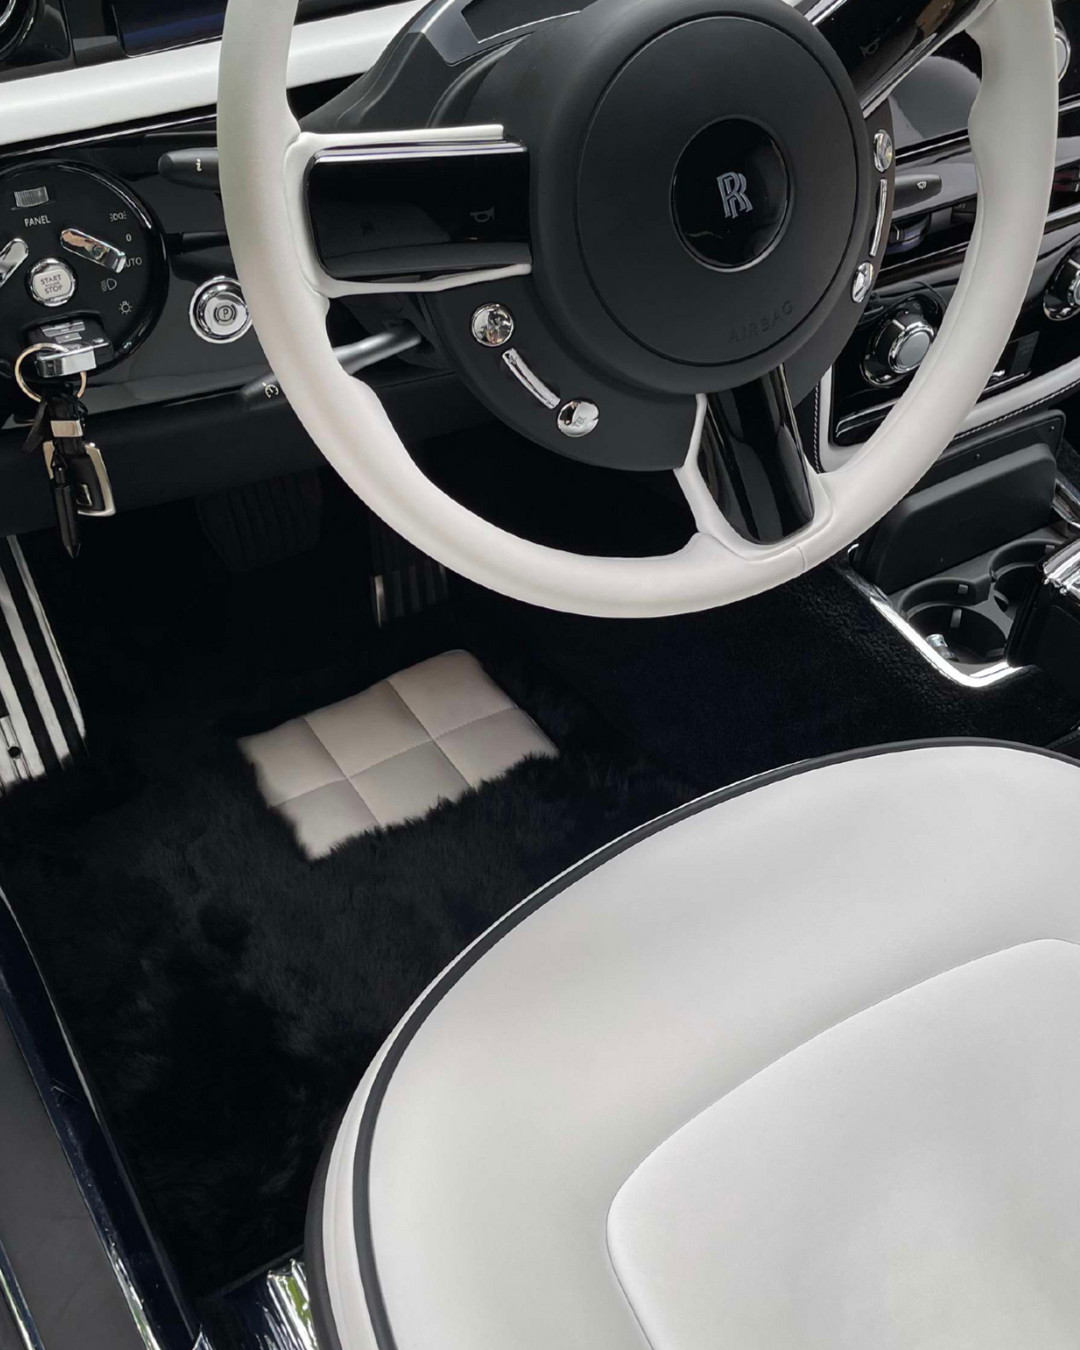 Rolls-royce style lambswool floor mats custom made for any car.